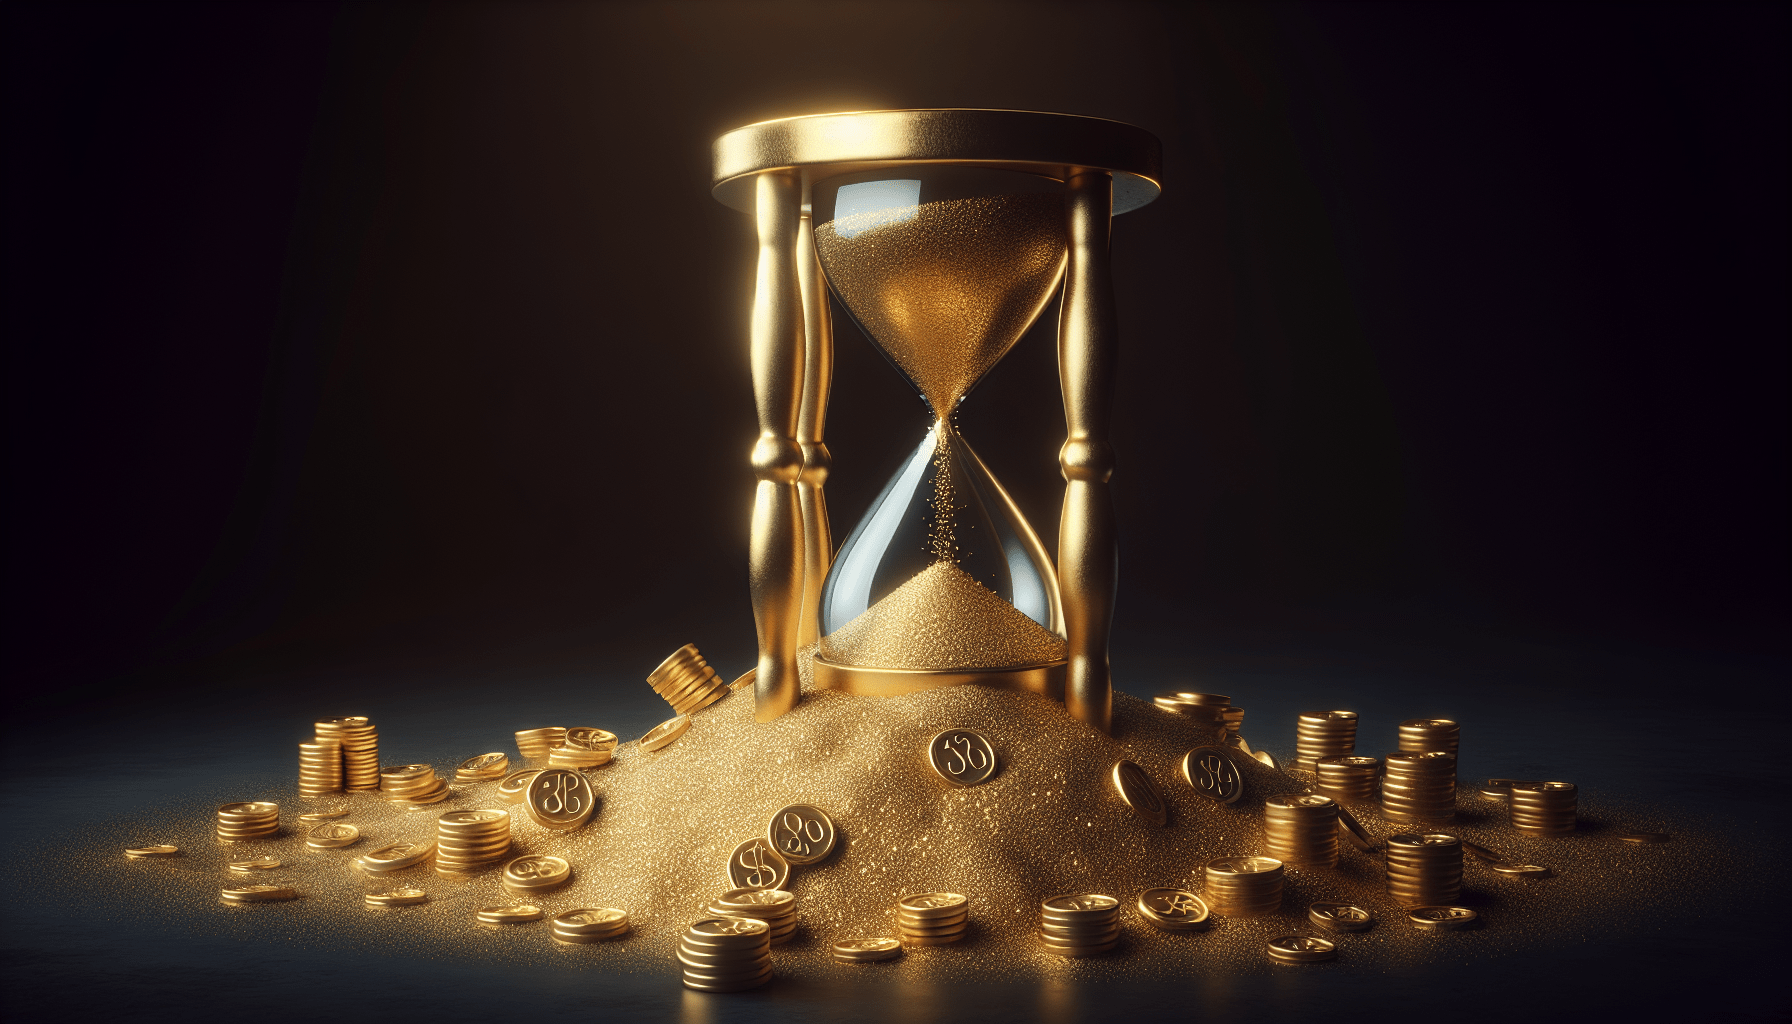 What Happens If The Bank Holding My Gold Investment Goes Bankrupt In Malaysia?